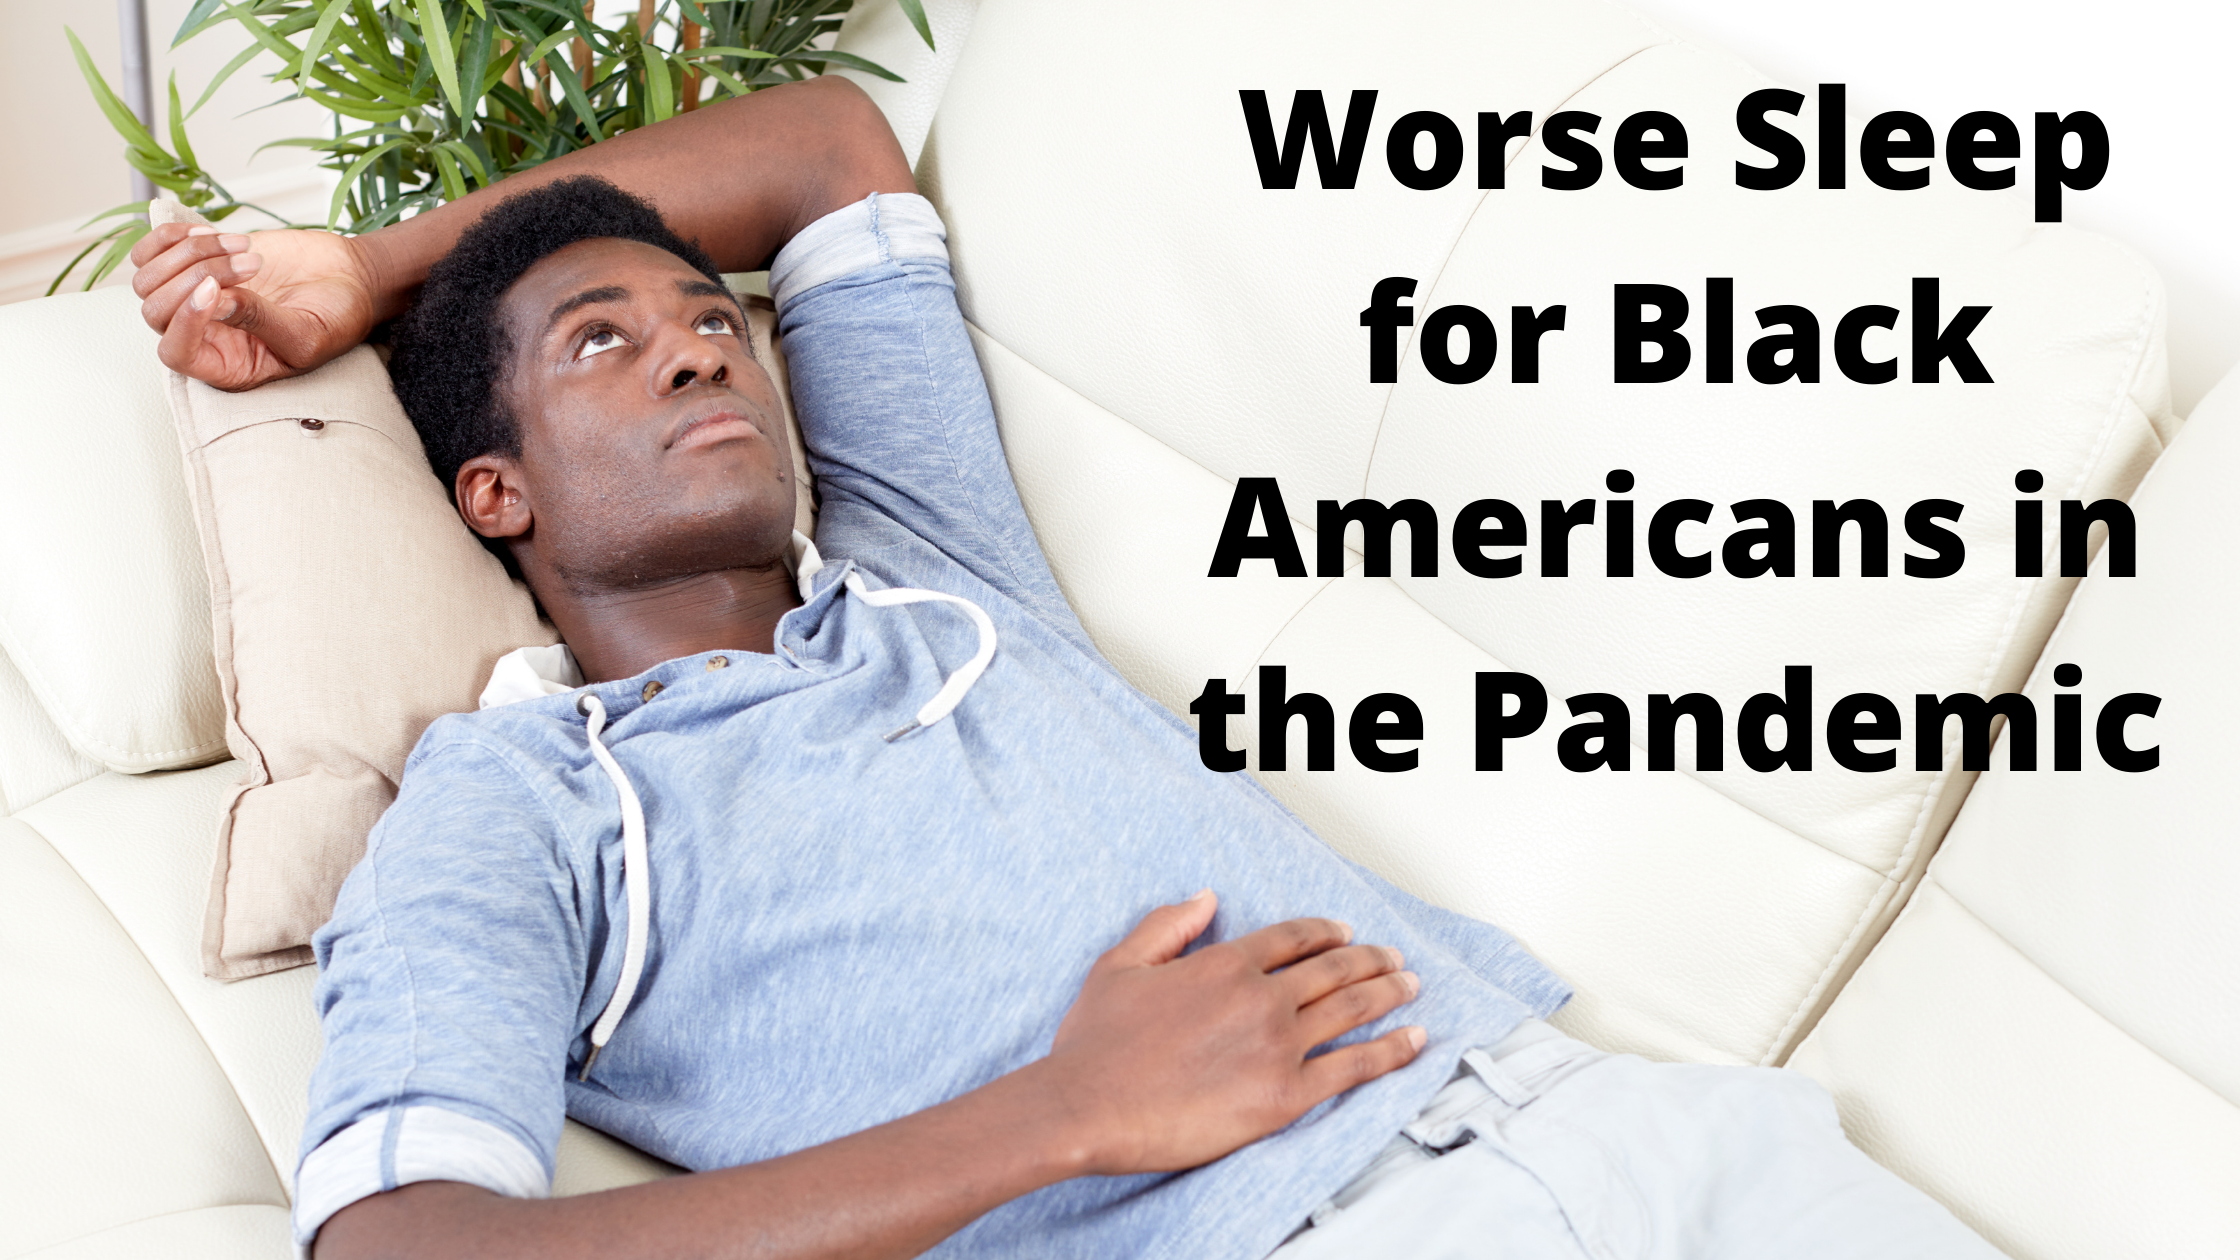 Worse Sleep for Black Americans in the Pandemic